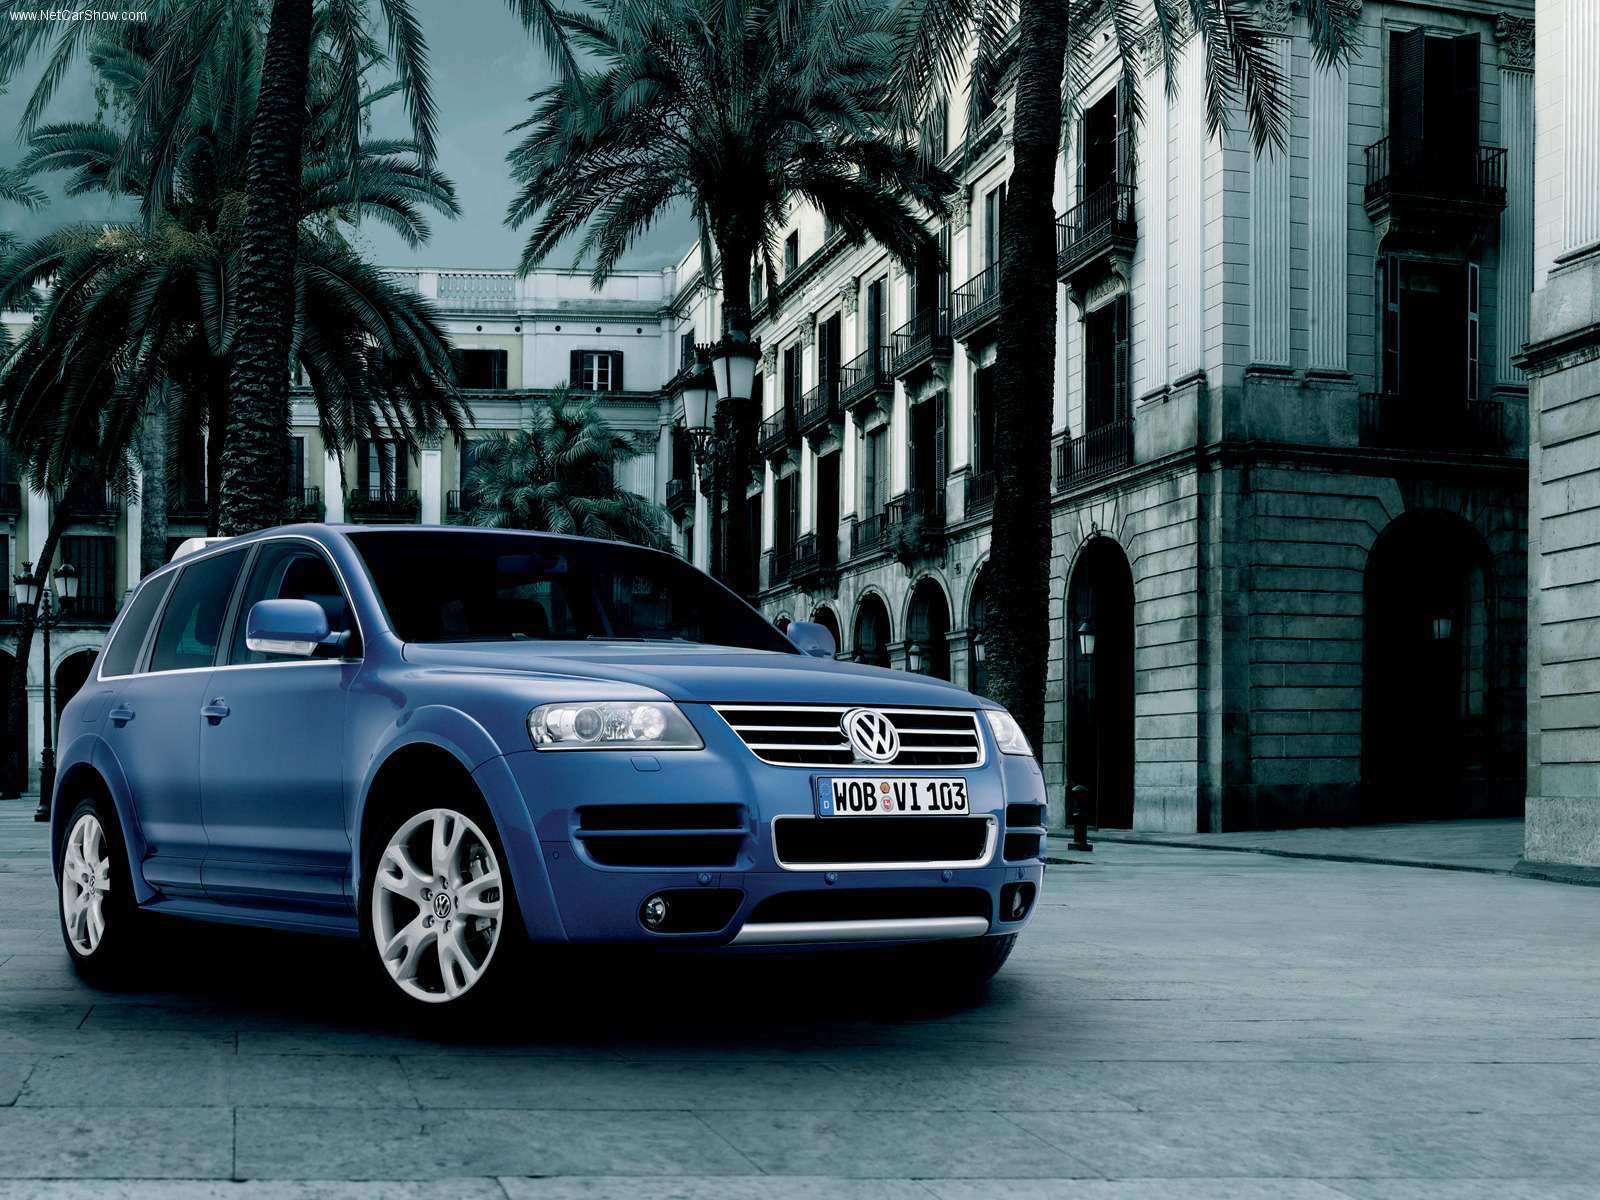 New car Volkswagen Touareg wallpaper and image